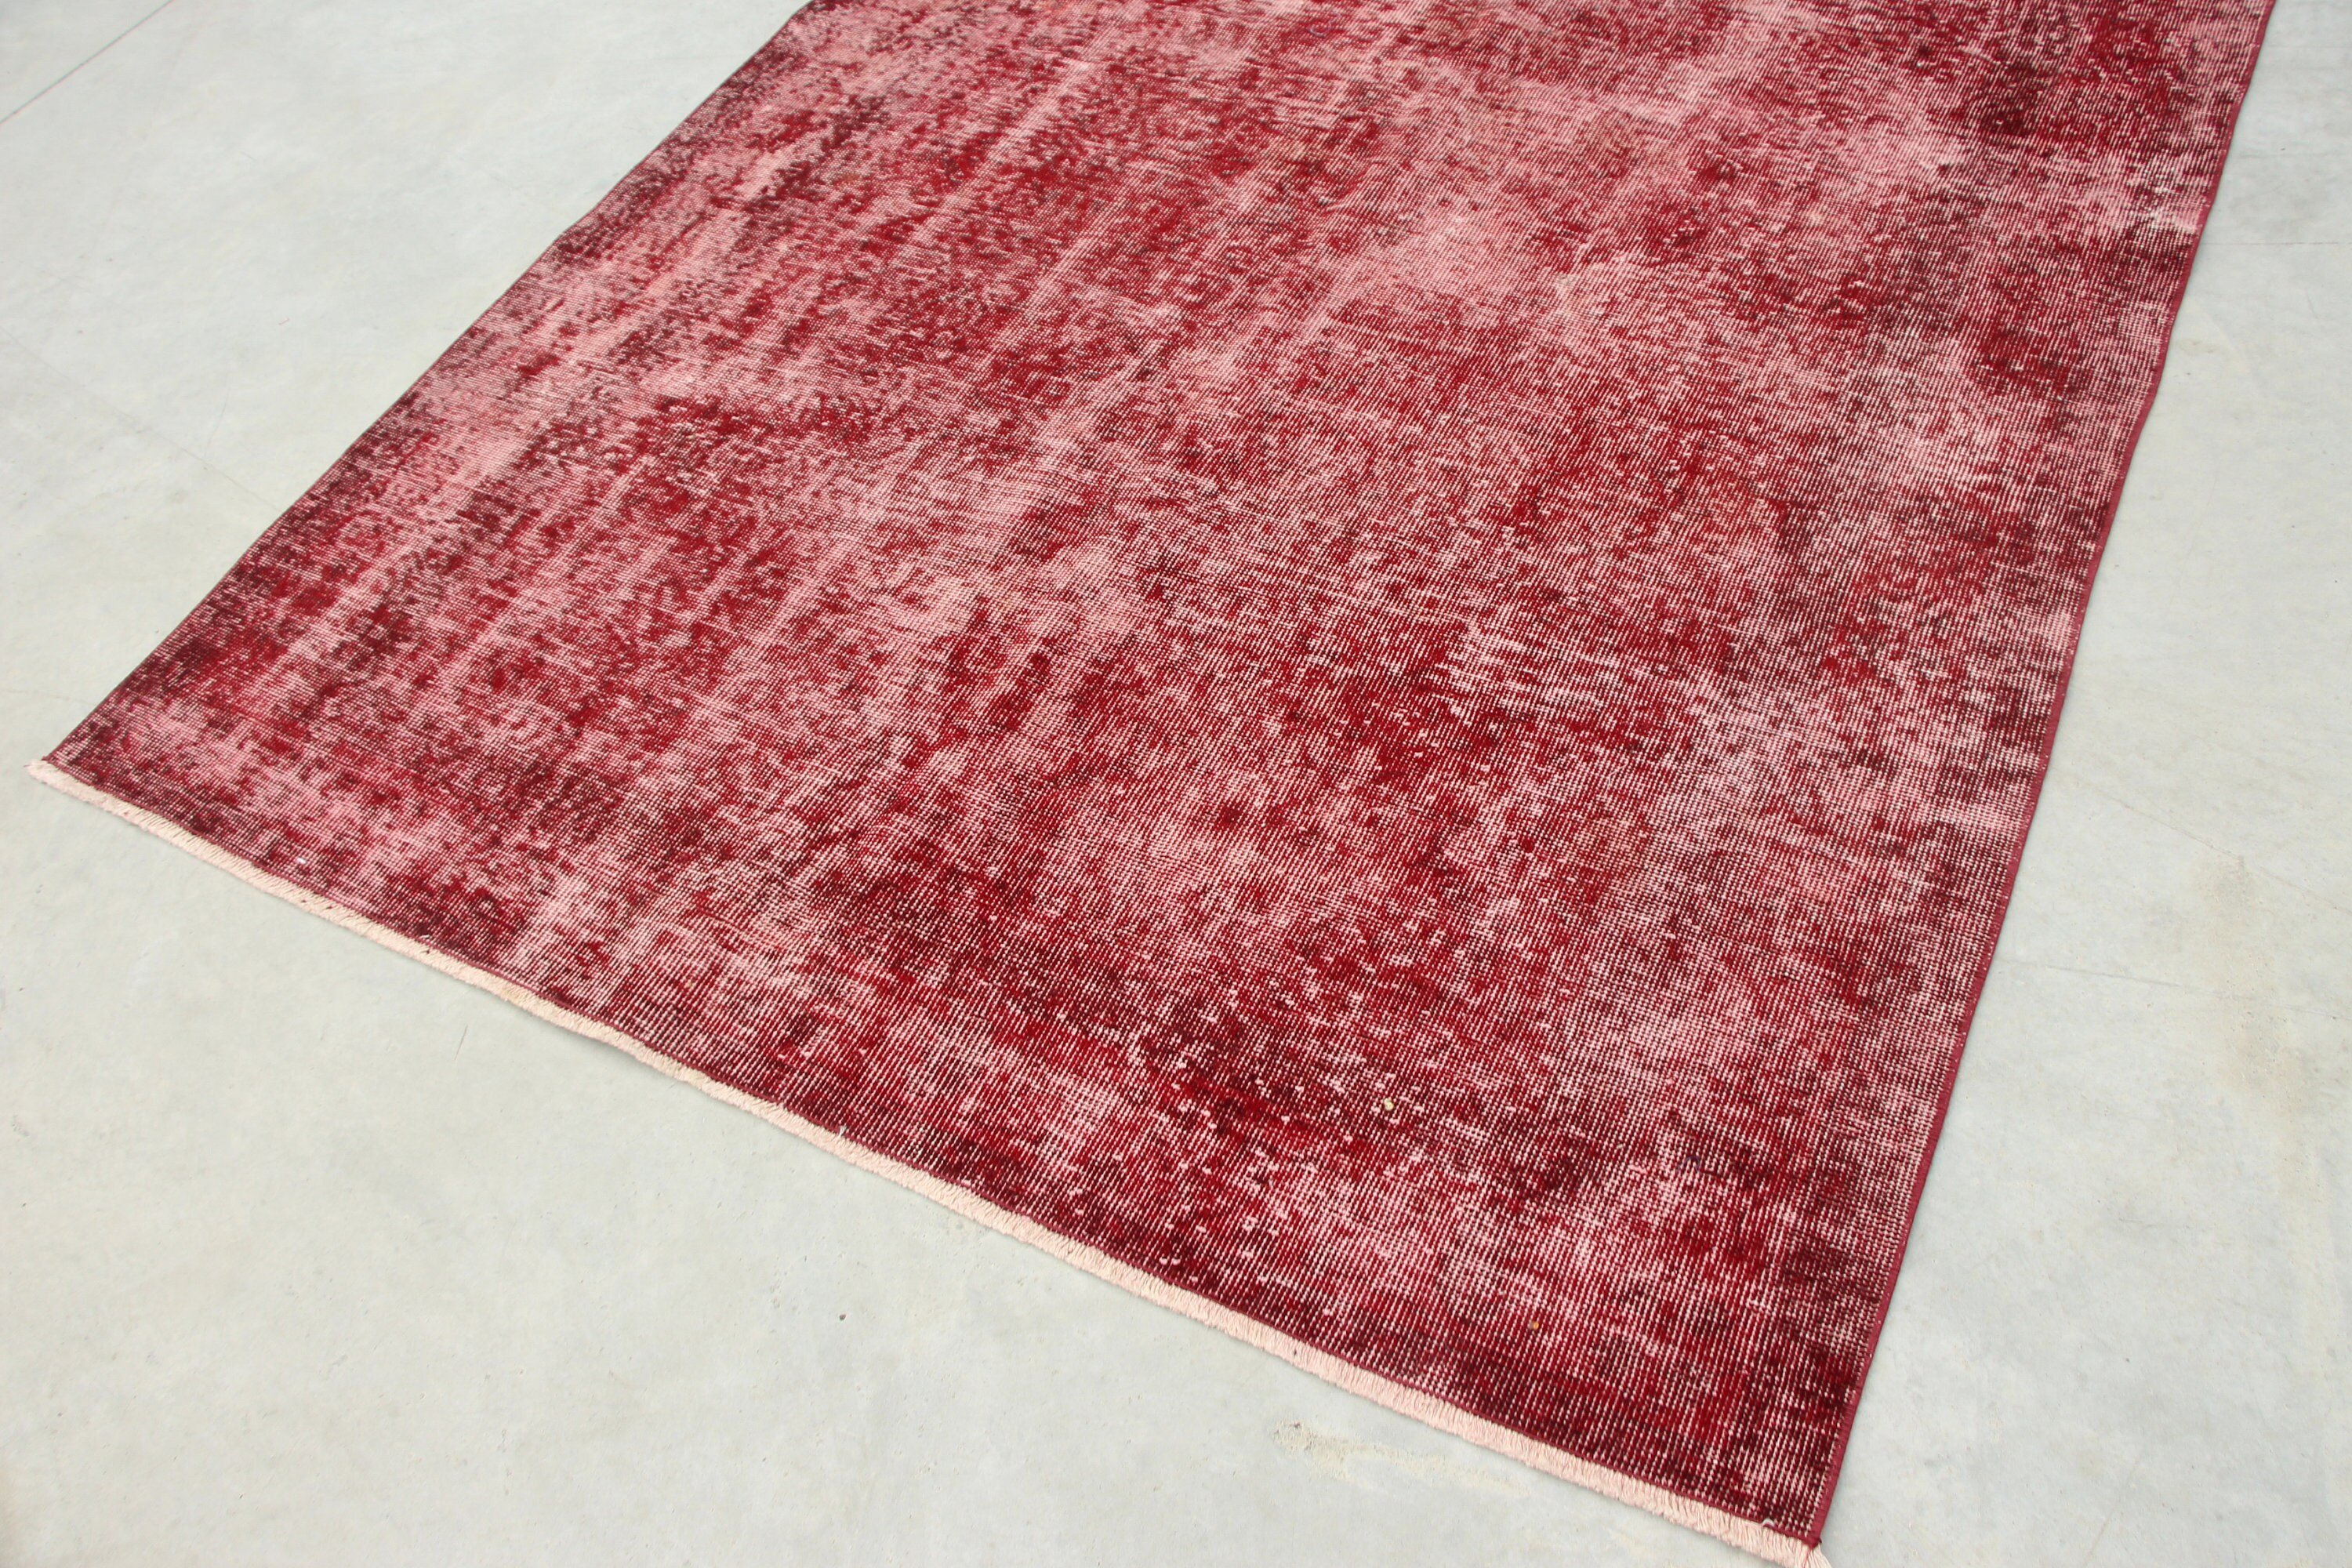 Antique Rugs, Rugs for Salon, Living Room Rug, Red Bedroom Rugs, 5.5x9.2 ft Large Rugs, Kitchen Rug, Turkish Rugs, Salon Rugs, Vintage Rug